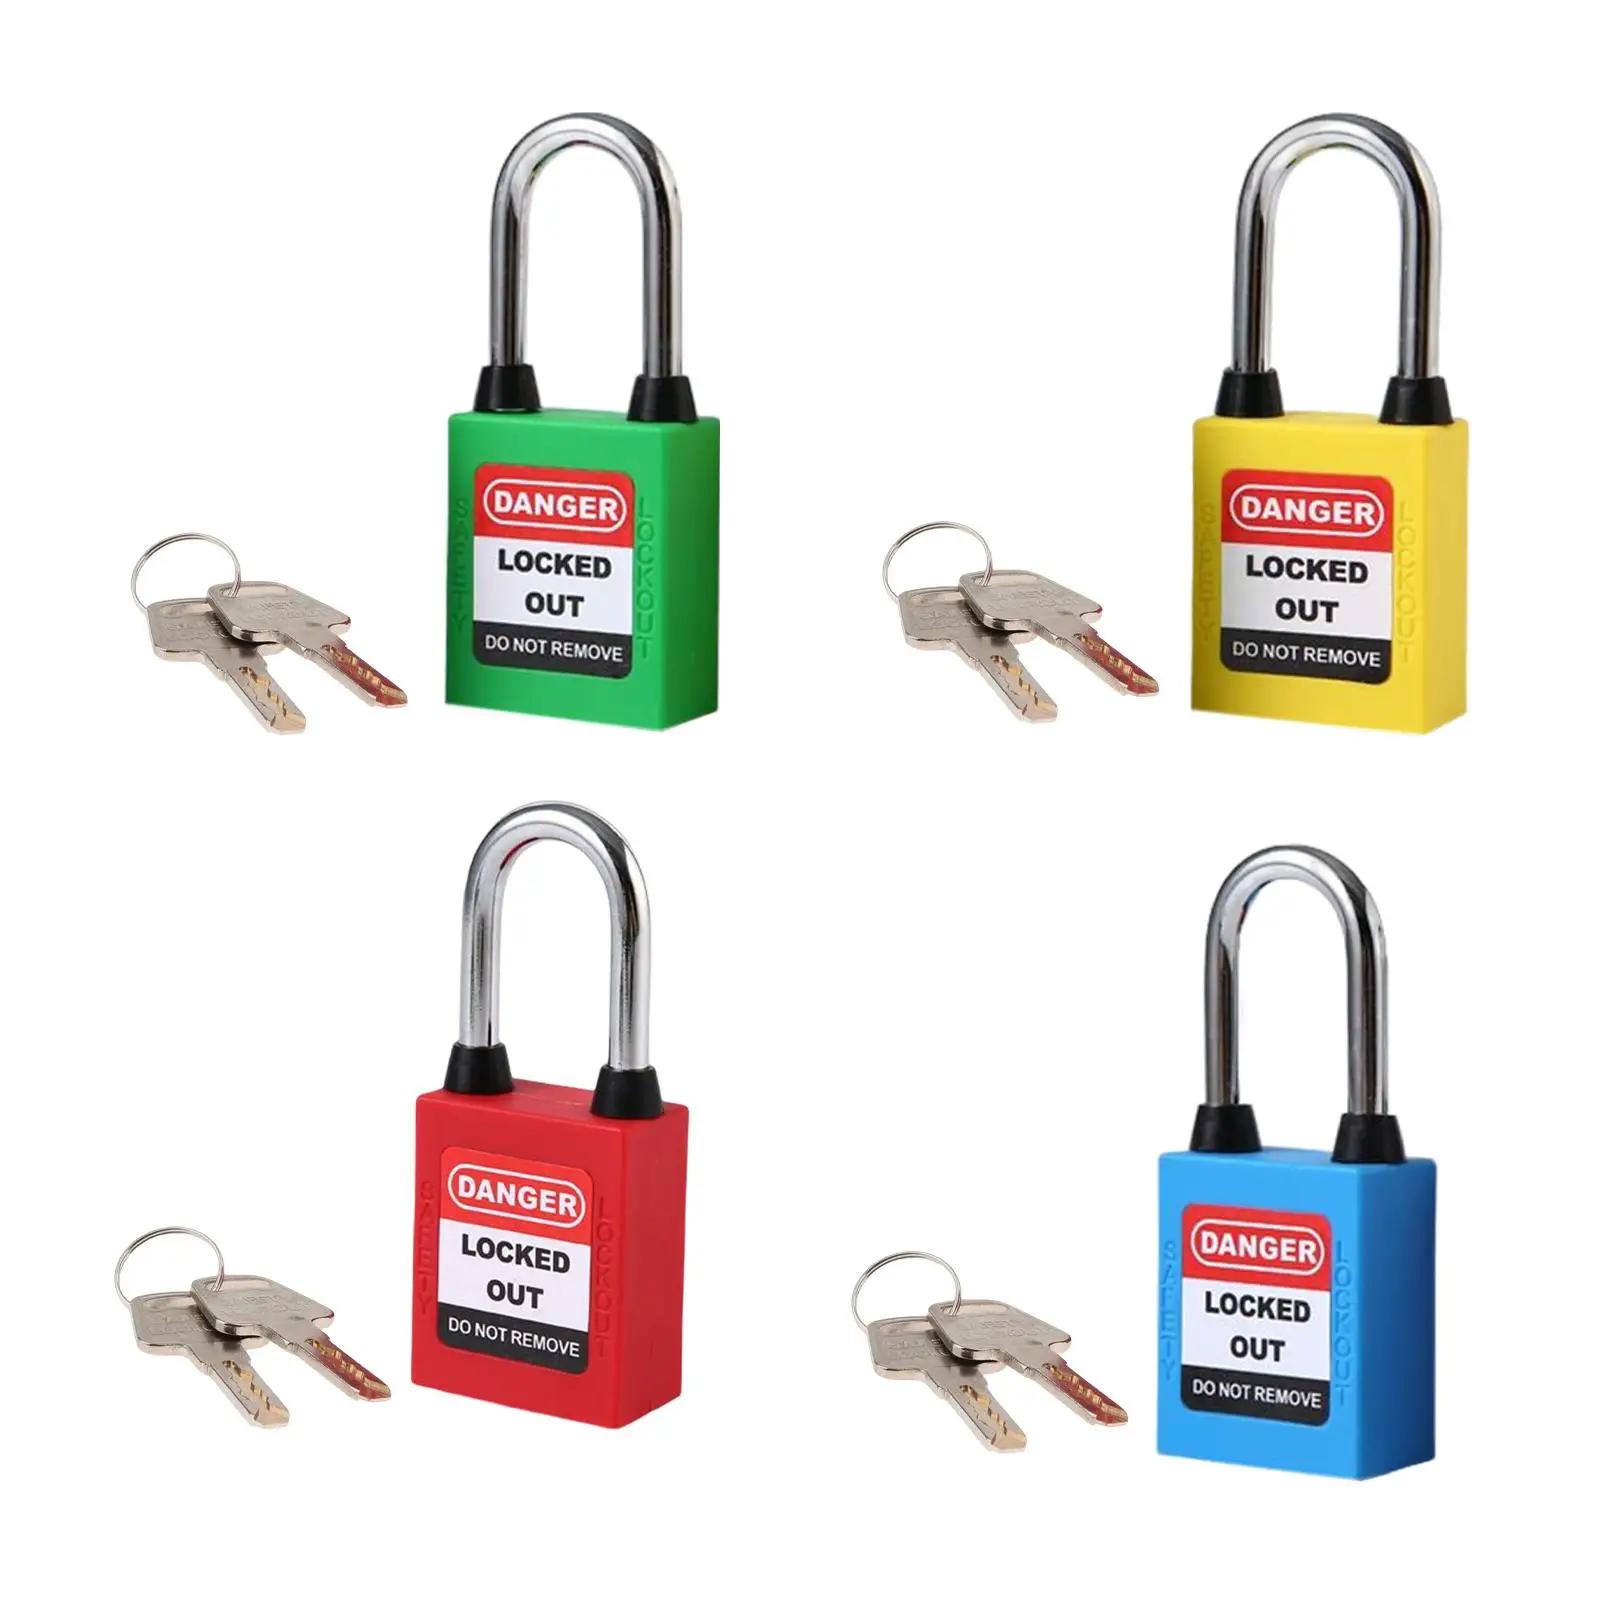 Lockout Tagout Locks Lock Out Tag Out Steel Shackle 1.5inch Shackle Compact